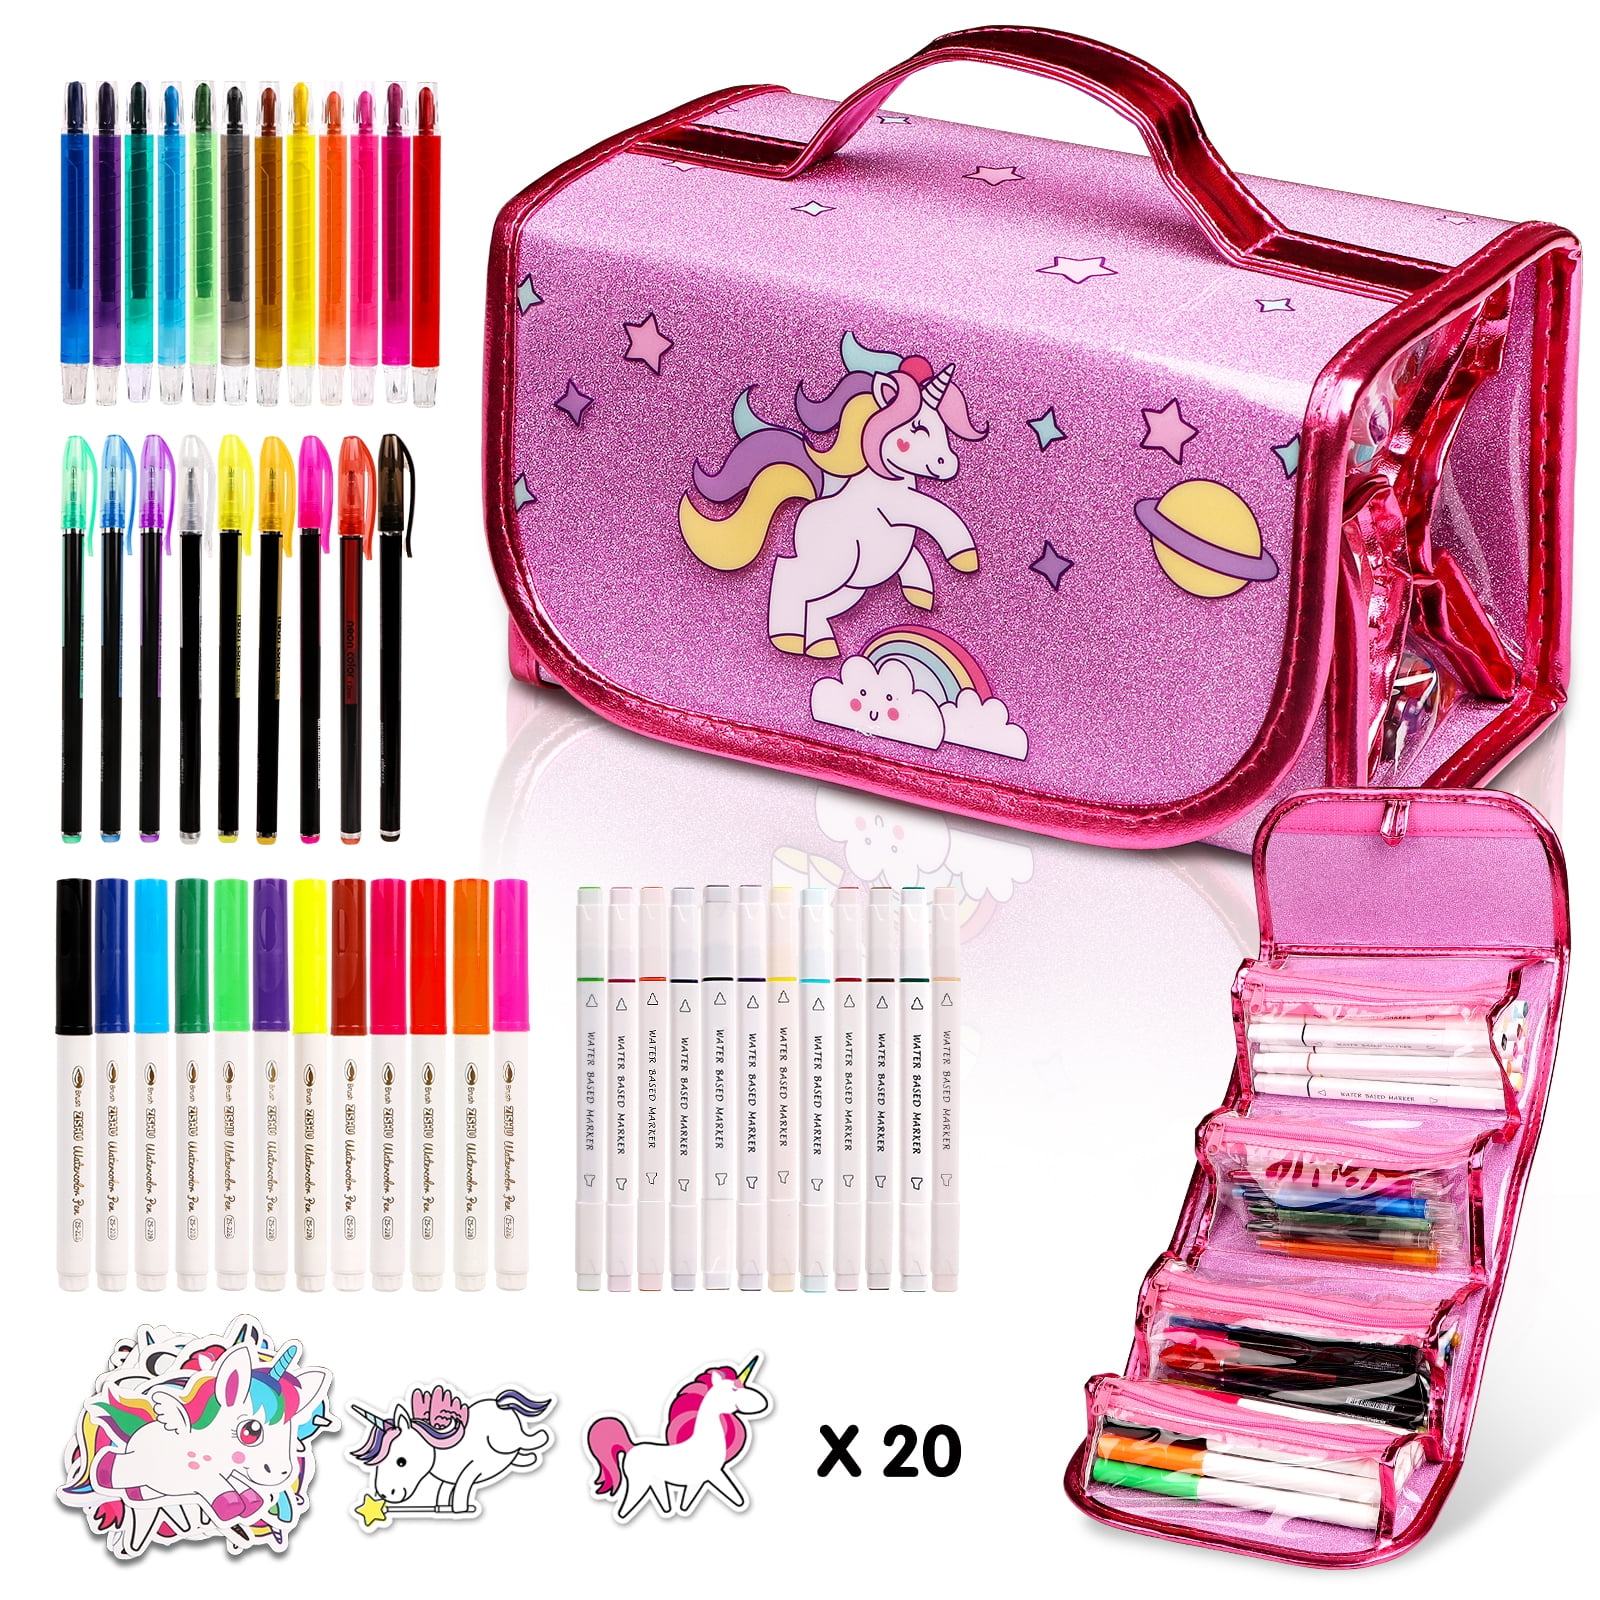 Hopewood Fruit Scented Washable Markers Set 45 pcs with Glitte Unicorn  Pencil Case, Art Supplies for Kids Ages 4-6-8, Creative Art Coloring Painting  Kits, Unicorn Gifts for Girls 4 5 6 7 8 9 Year Old